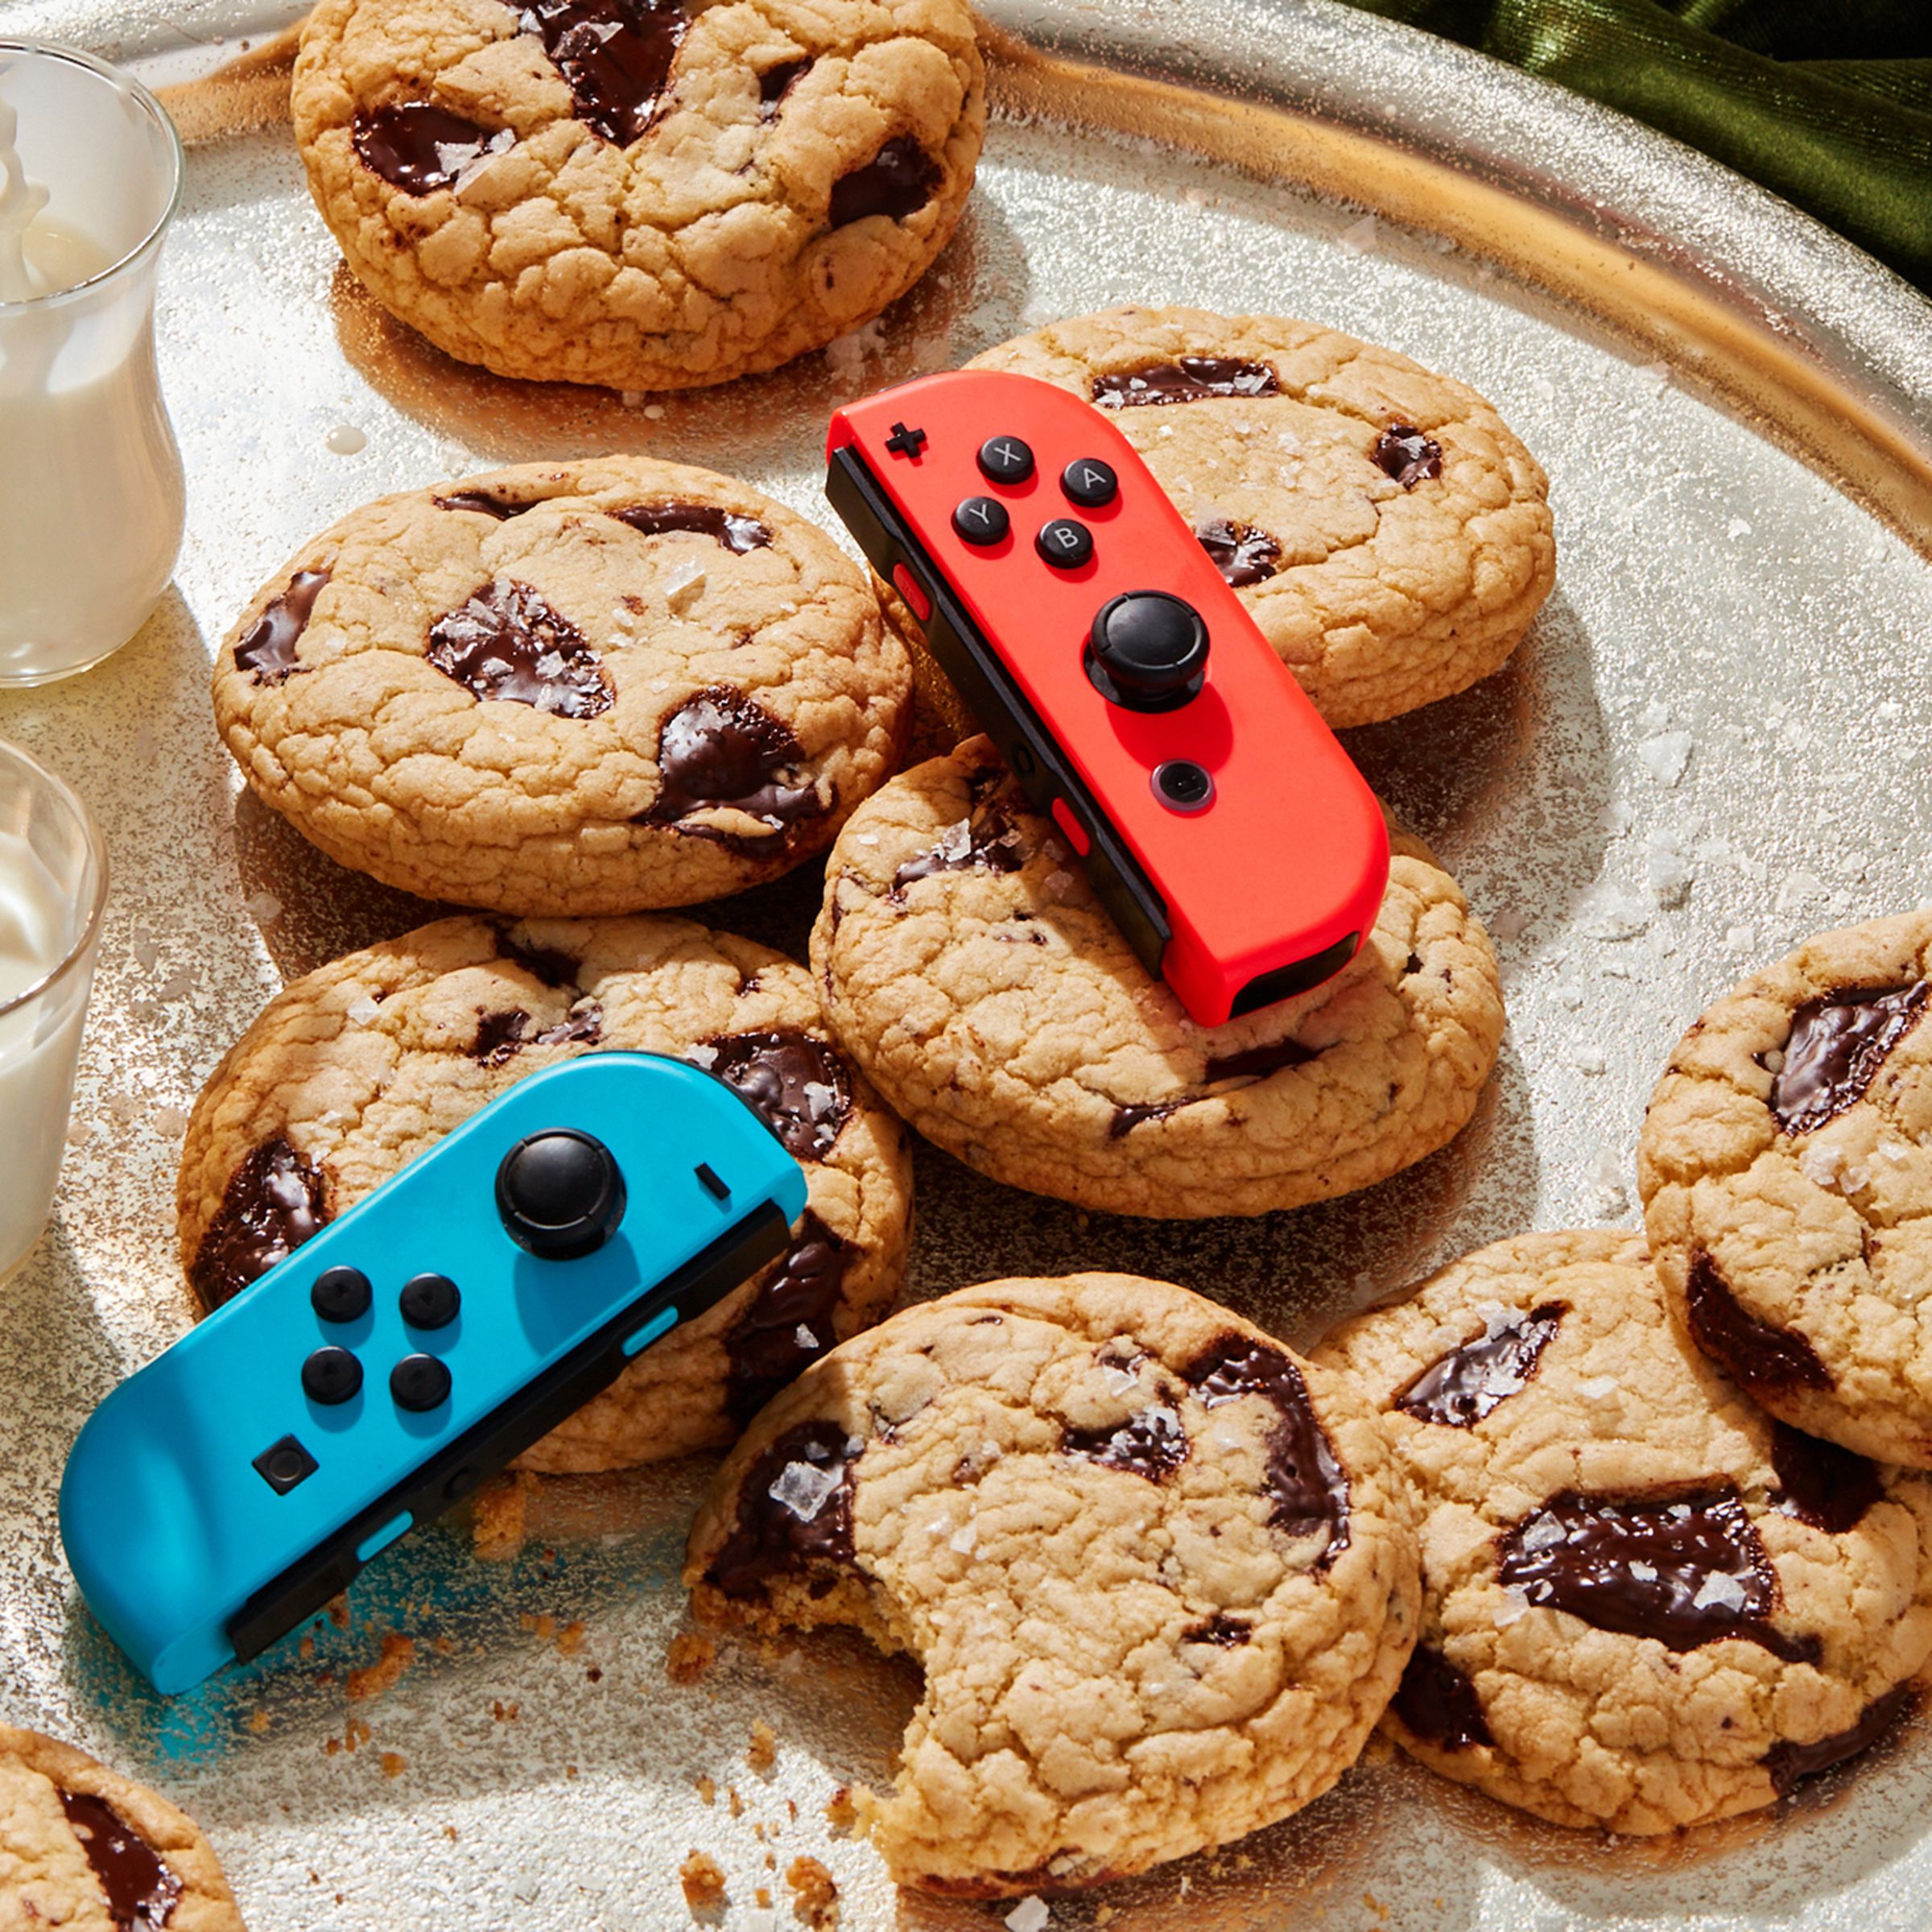 Nintendo Switch Joy-Con controllers on a tray of milk and cookies